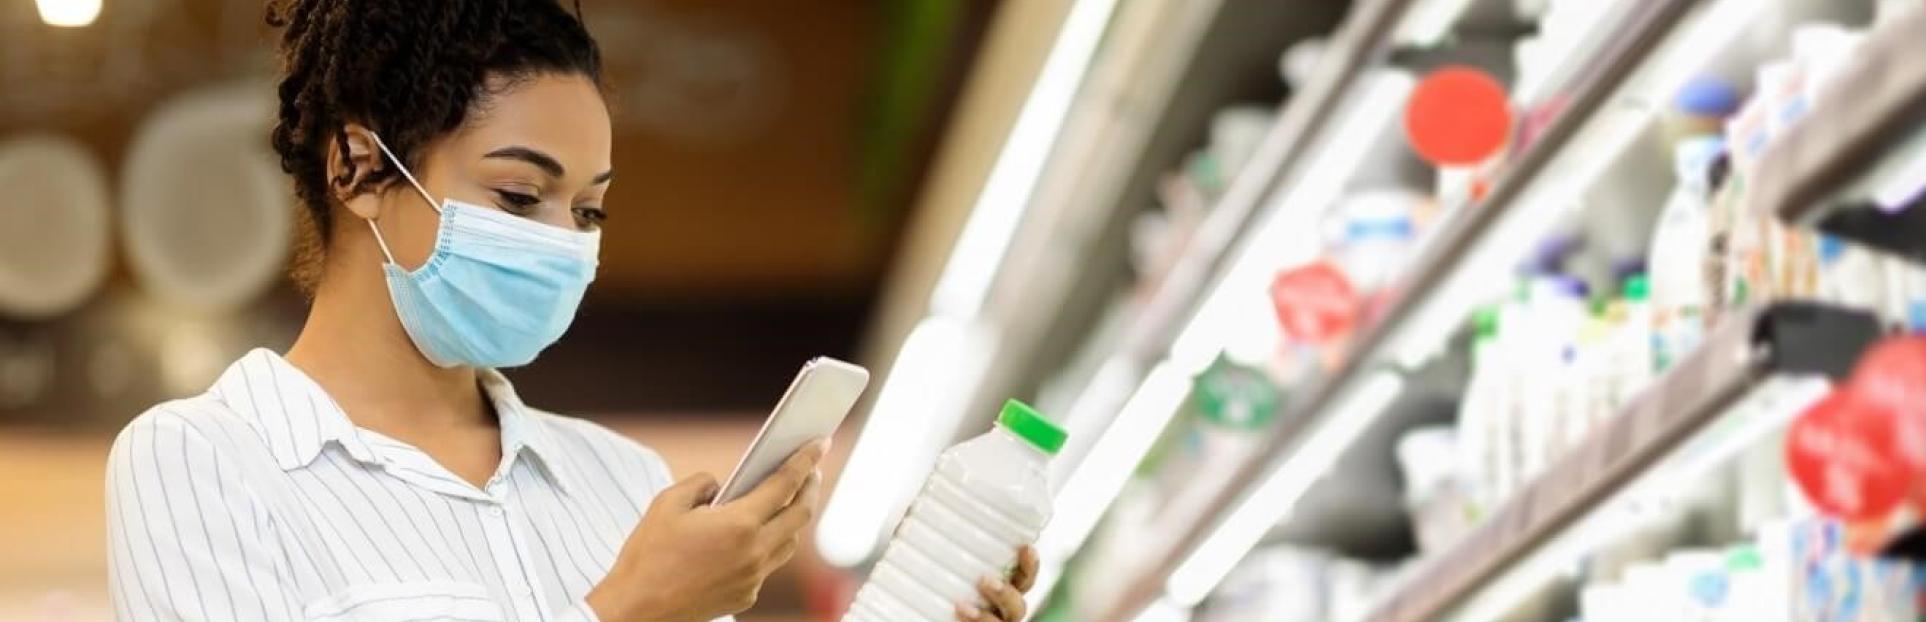 woman looking at phone and milk in store